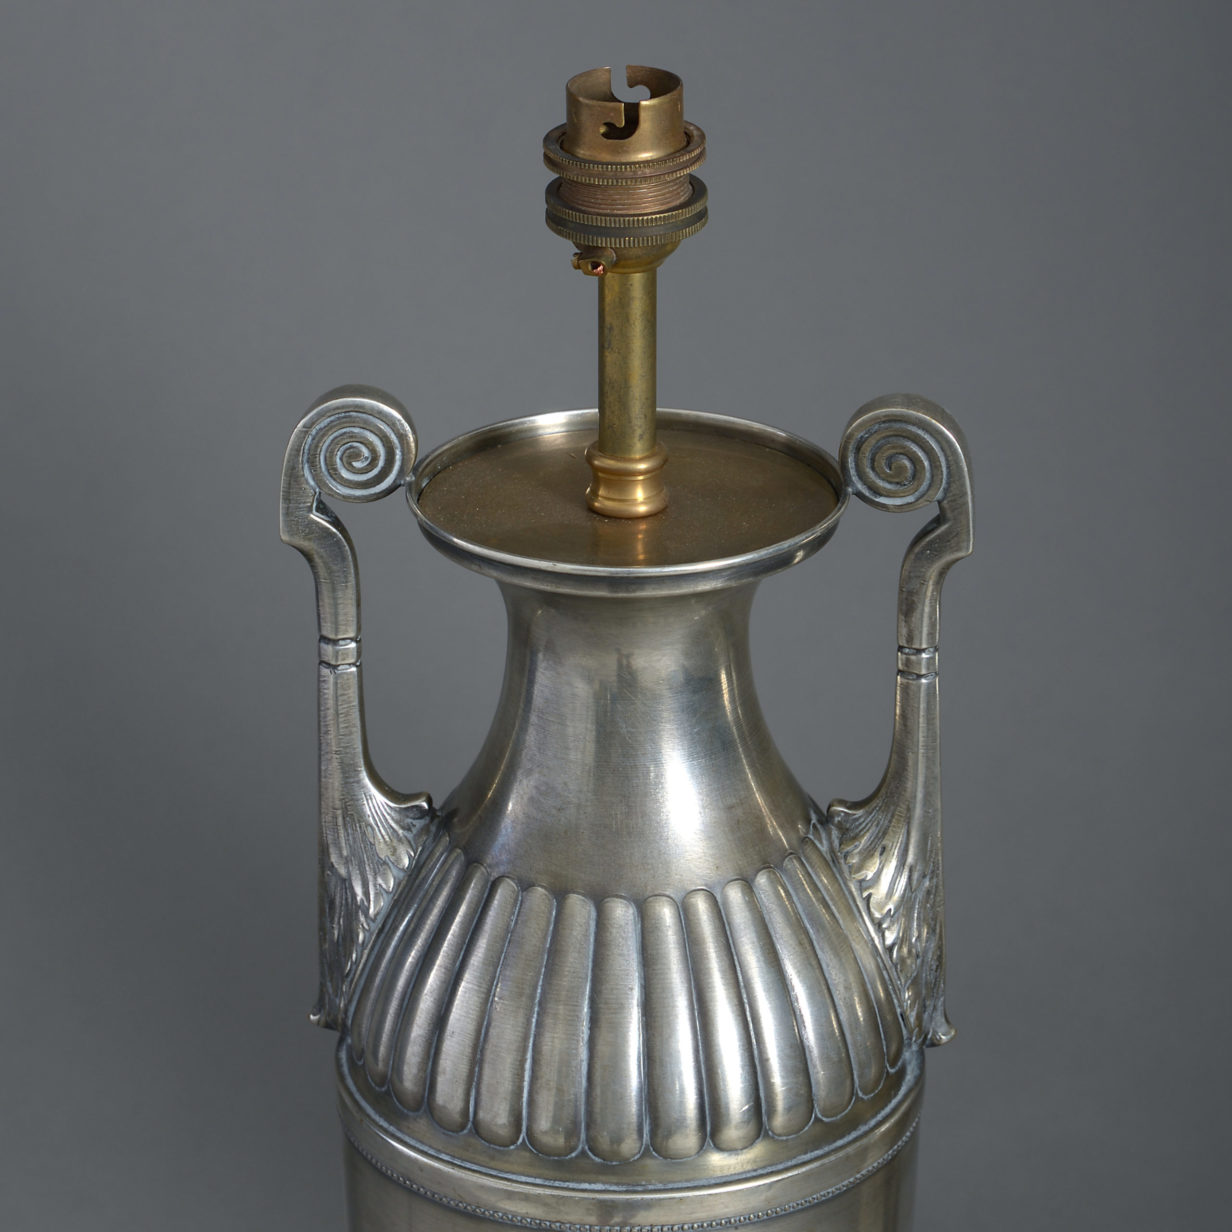 A pair of silvered table lamps